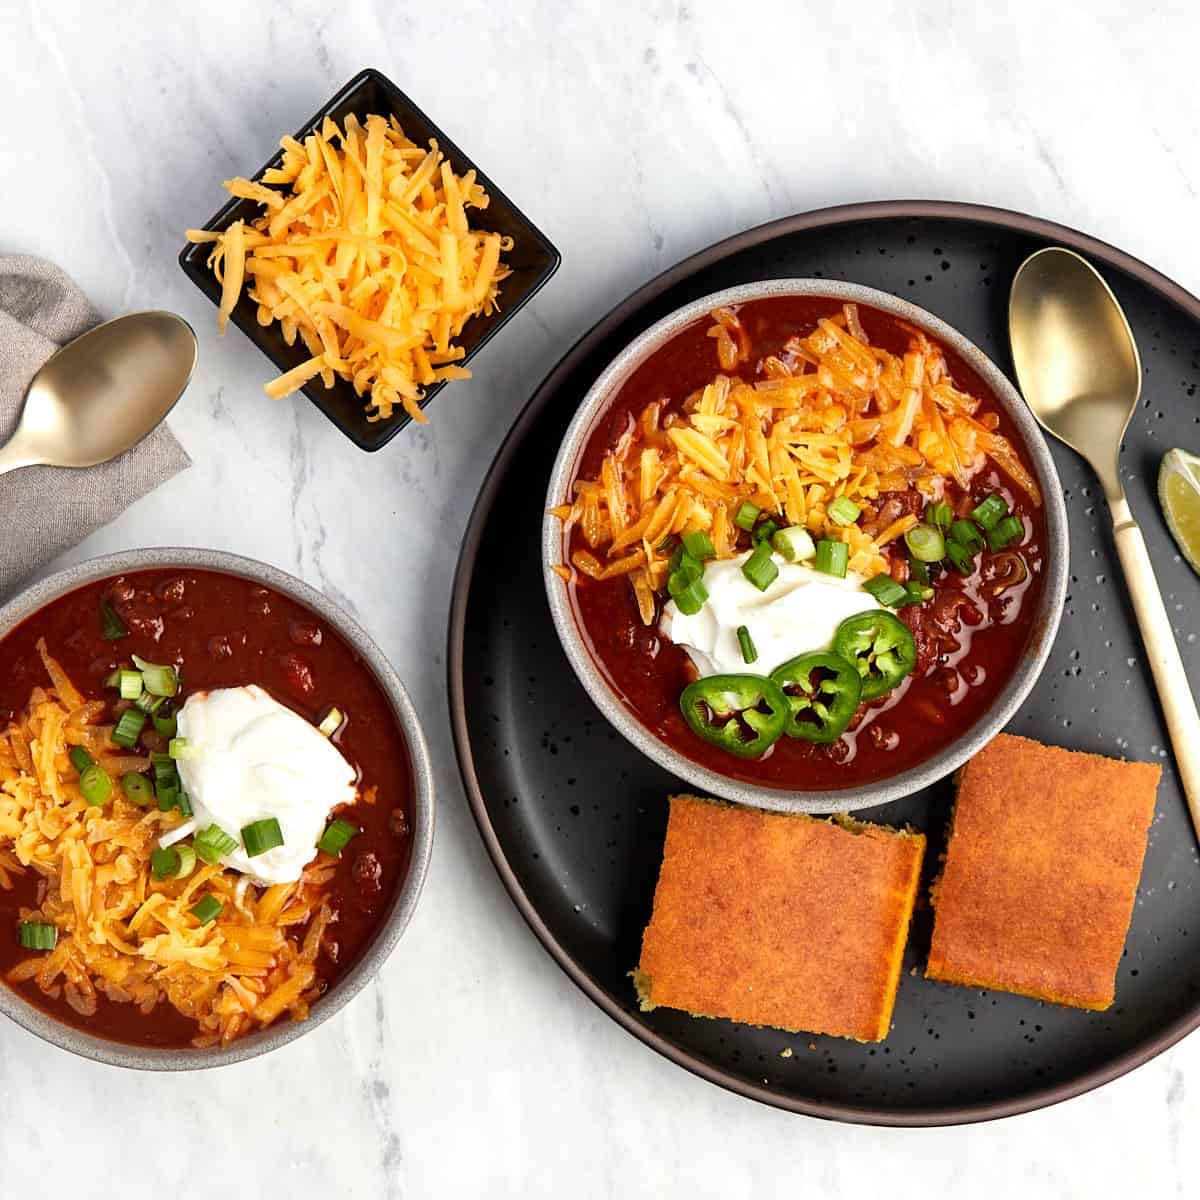 gameday chili topped with cheese, sour cream, jalapenos with a side of corn bread